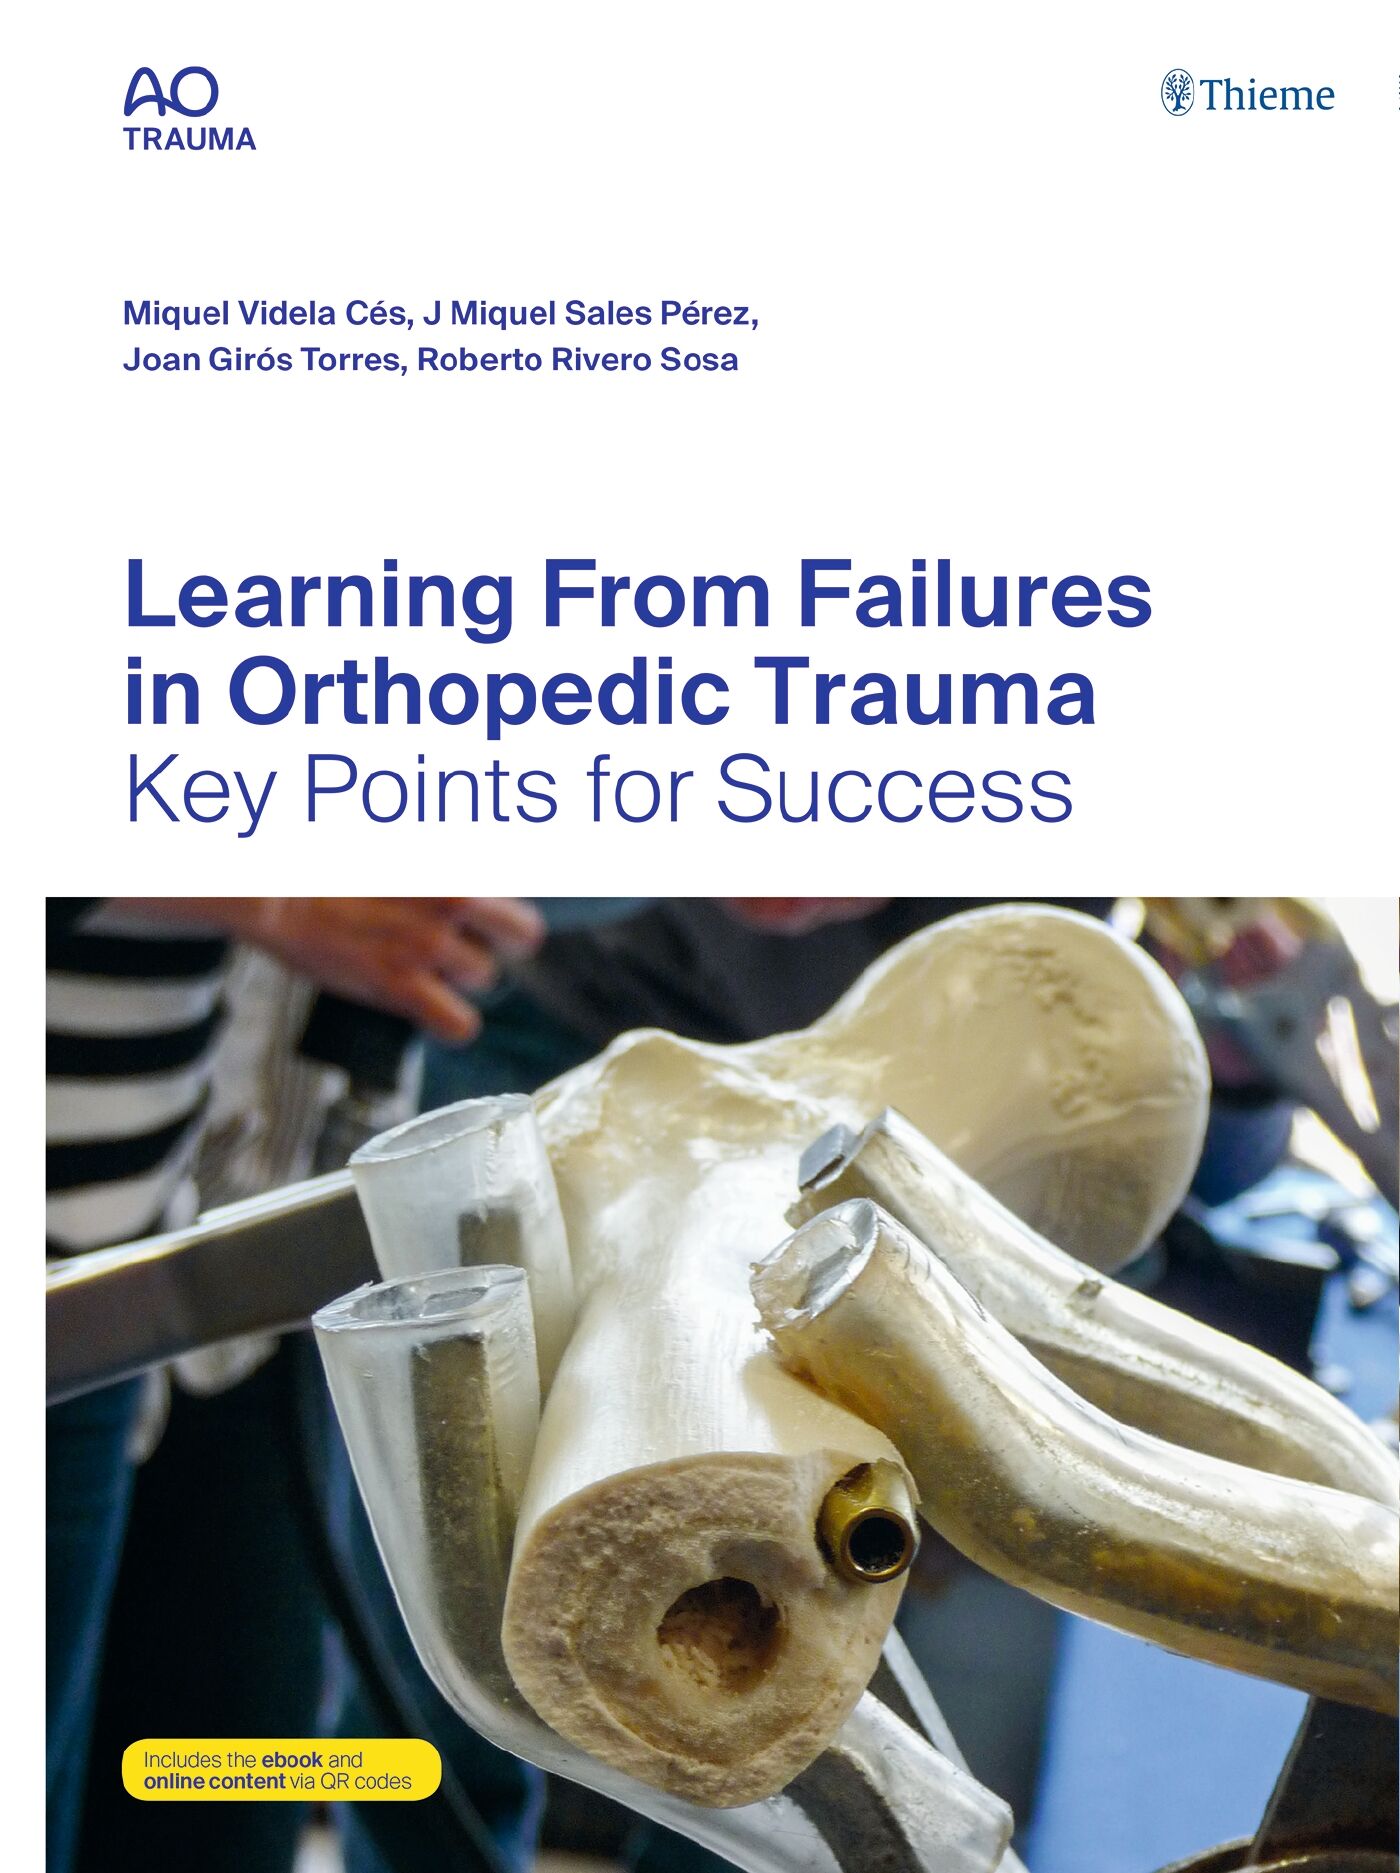 Learning From Failures in Orthopedic Trauma, 9783132434561